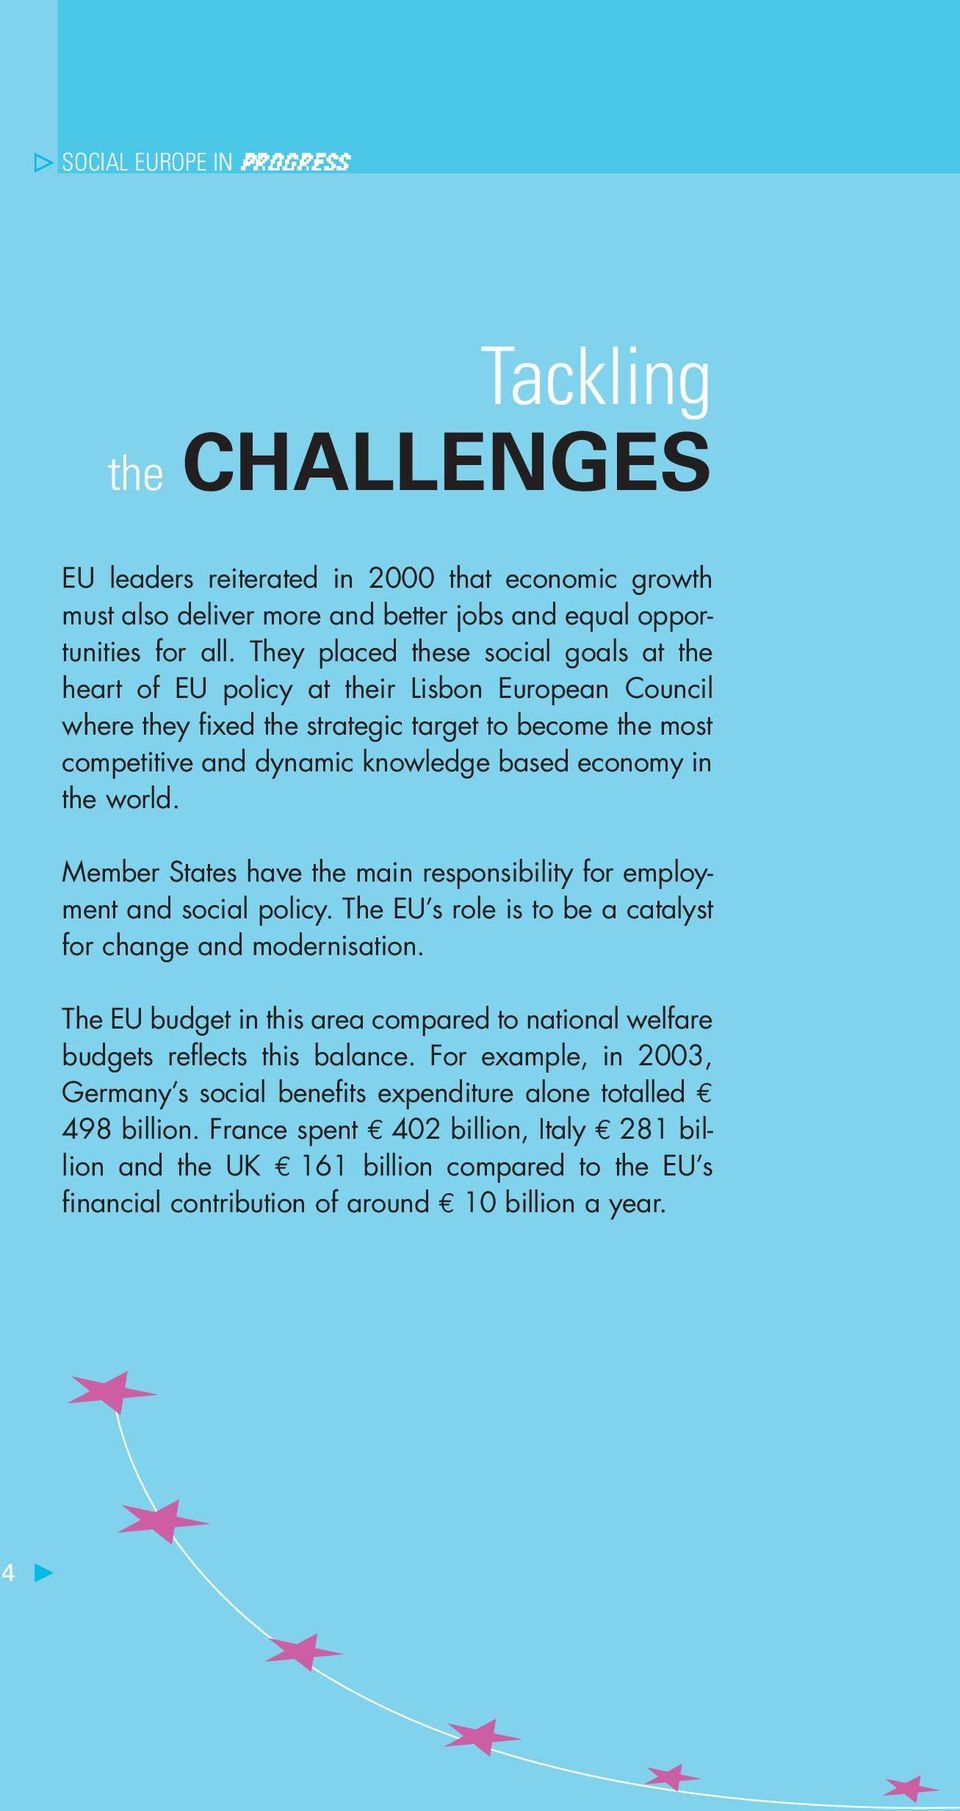 the world. Member States have the main responsibility for employment and social policy. The EU s role is to be a catalyst for change and modernisation.